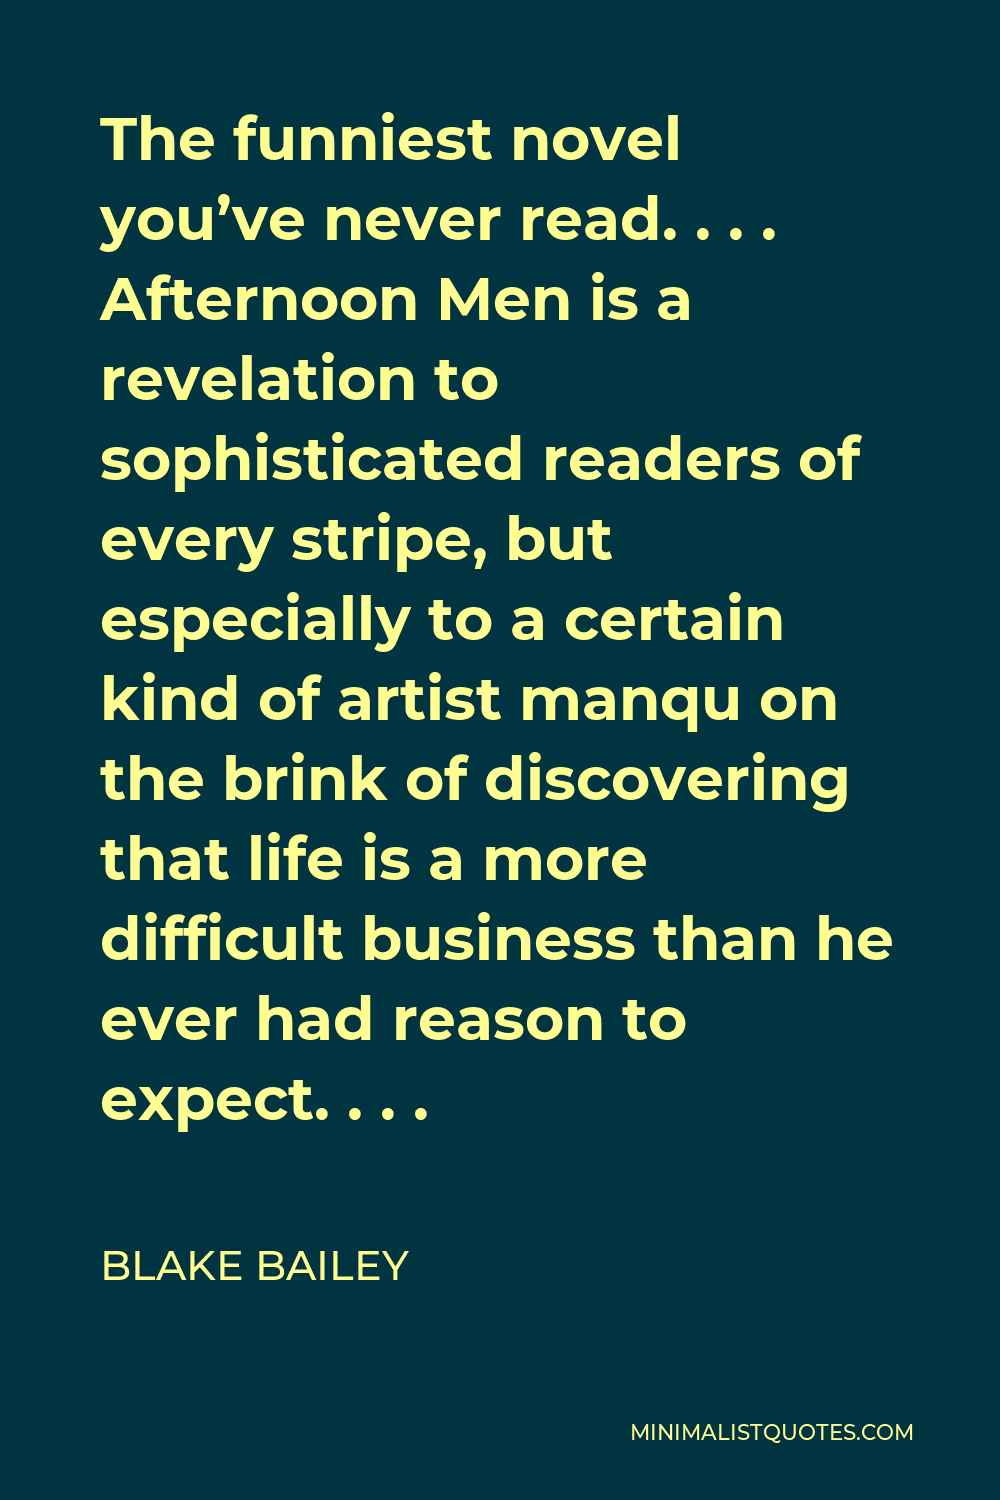 Blake Bailey Quote - The funniest novel you’ve never read. . . . Afternoon Men is a revelation to sophisticated readers of every stripe, but especially to a certain kind of artist manqu on the brink of discovering that life is a more difficult business than he ever had reason to expect. . . .